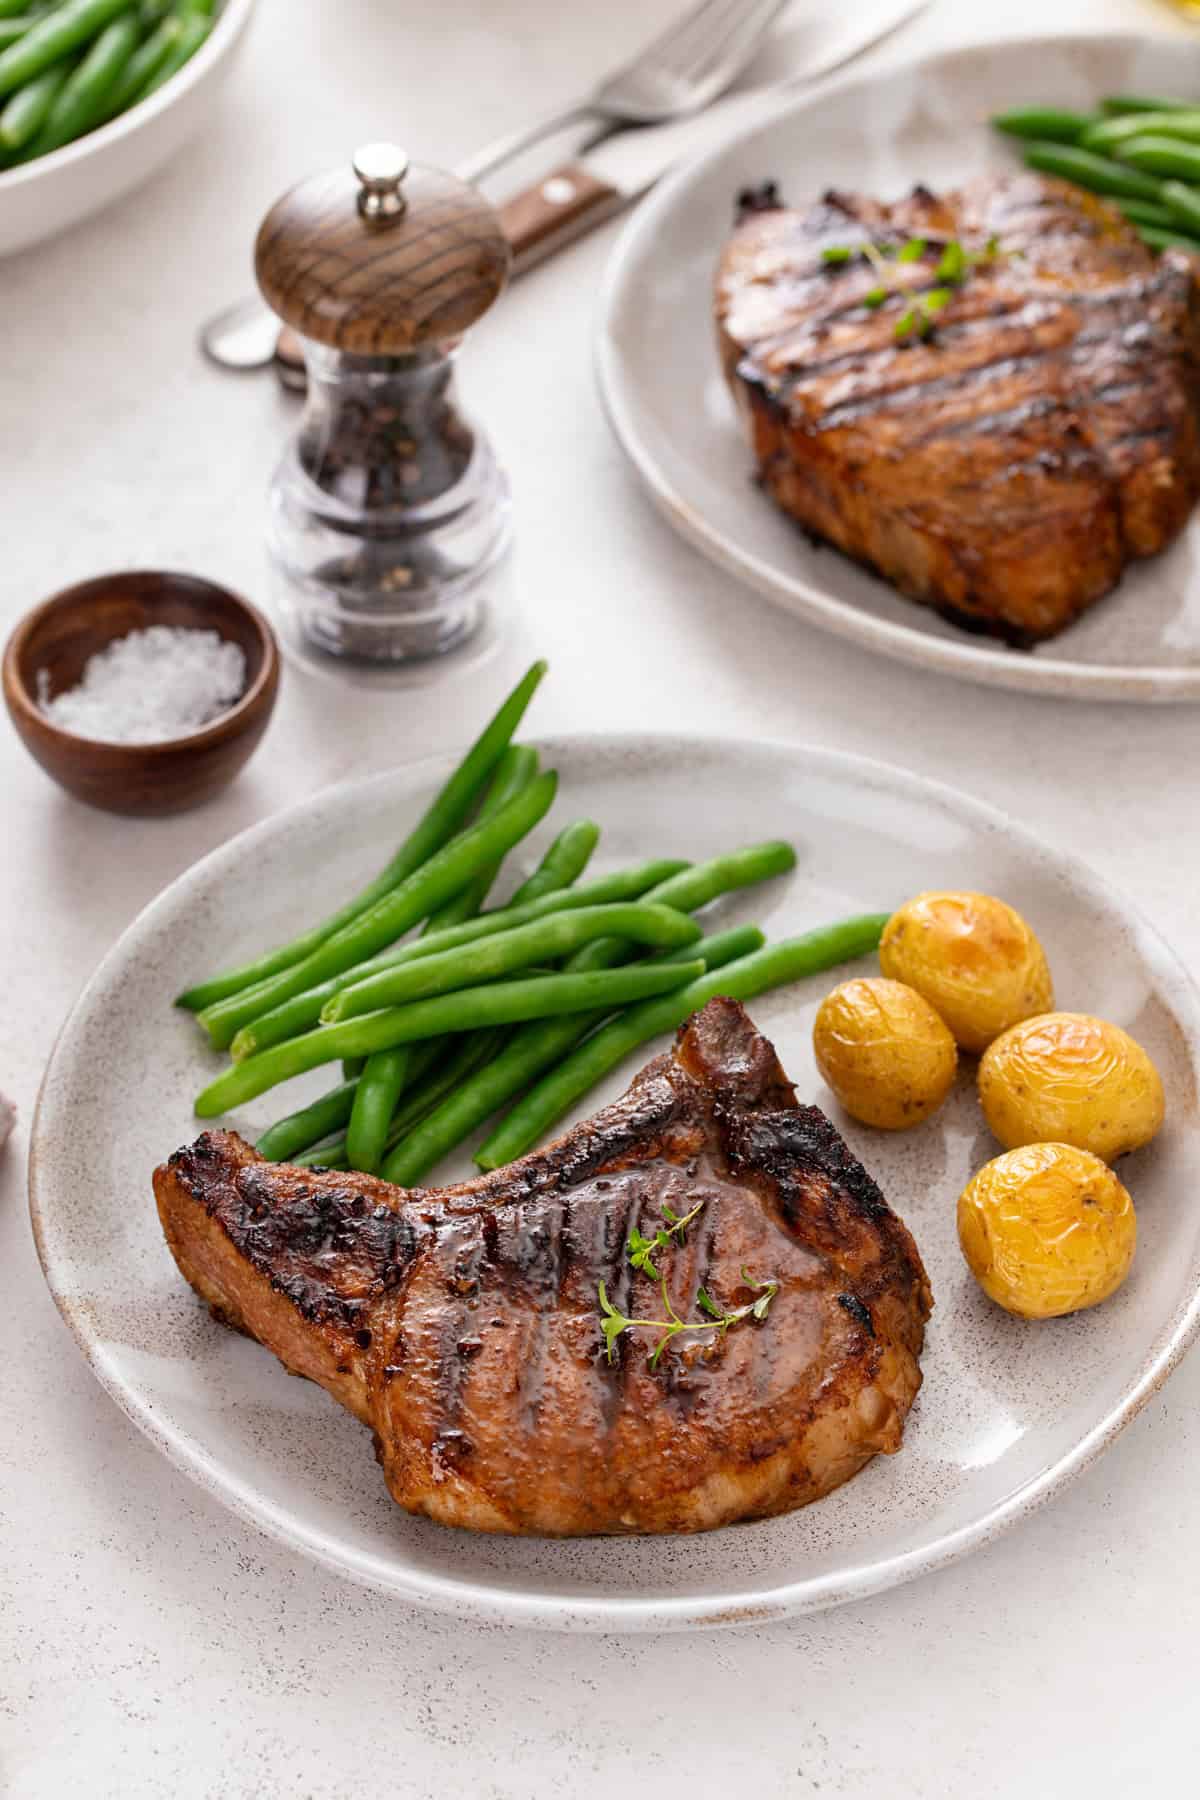 Grilled pork chop on a plate next to roasted potatoes and green beans. A second plate is visible in the background.